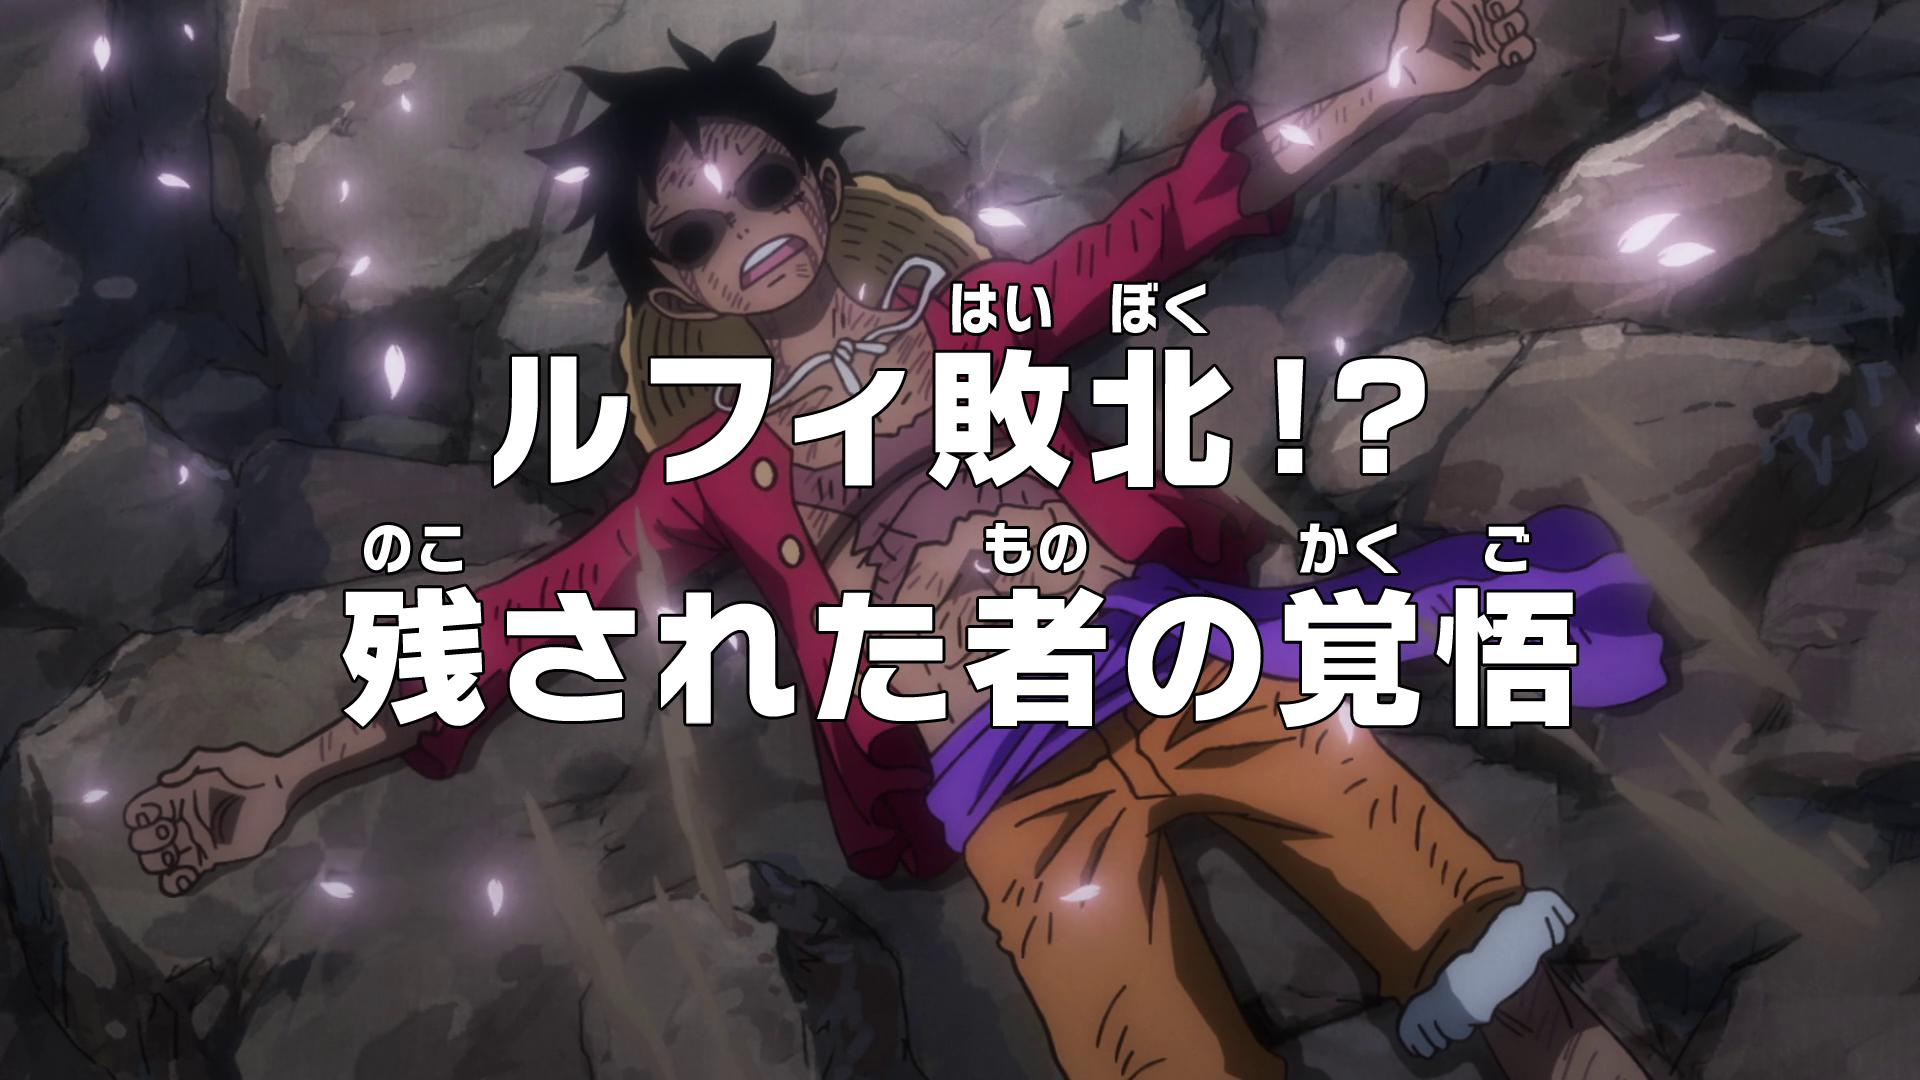 One Piece Ep-1070 ''Keep your word as always!'' by